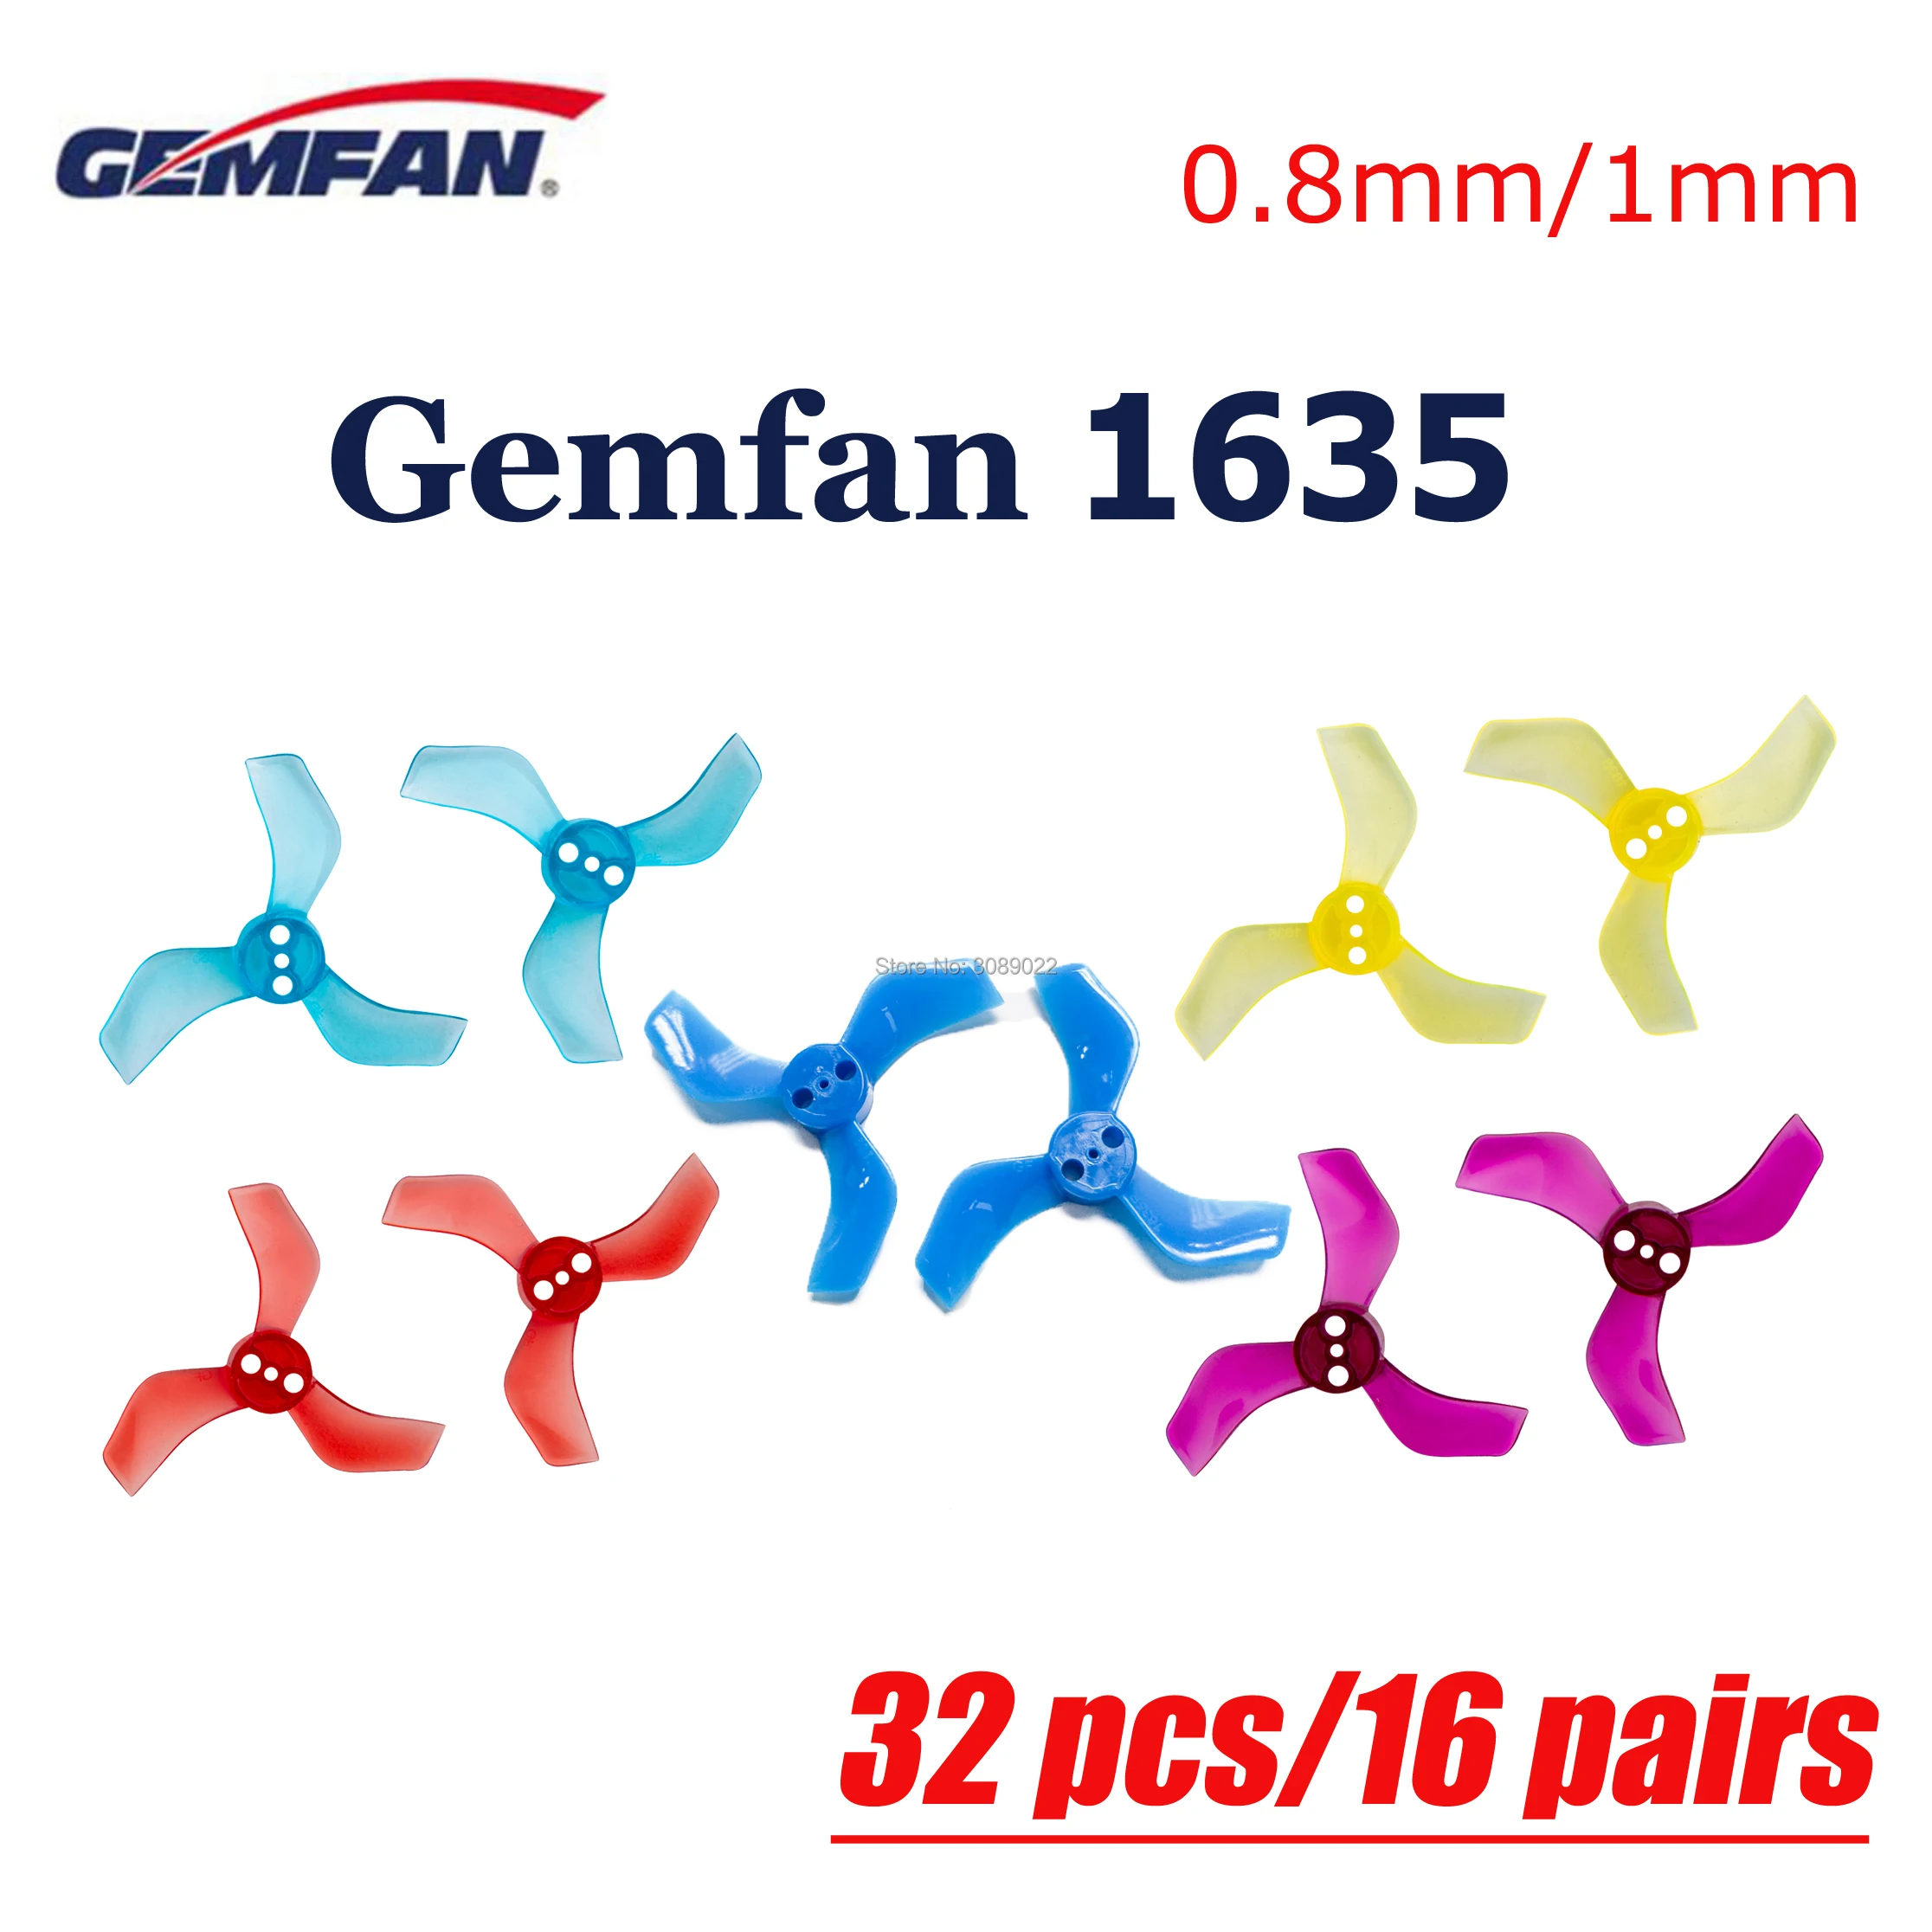 

32 pcs/16 pairs GEMFAN 1635 3-blade PC Propeller 1mm/1.5mm Hole CW CCW Motor FPV Propelle for 1103 1105 FPV Racing Drone Props